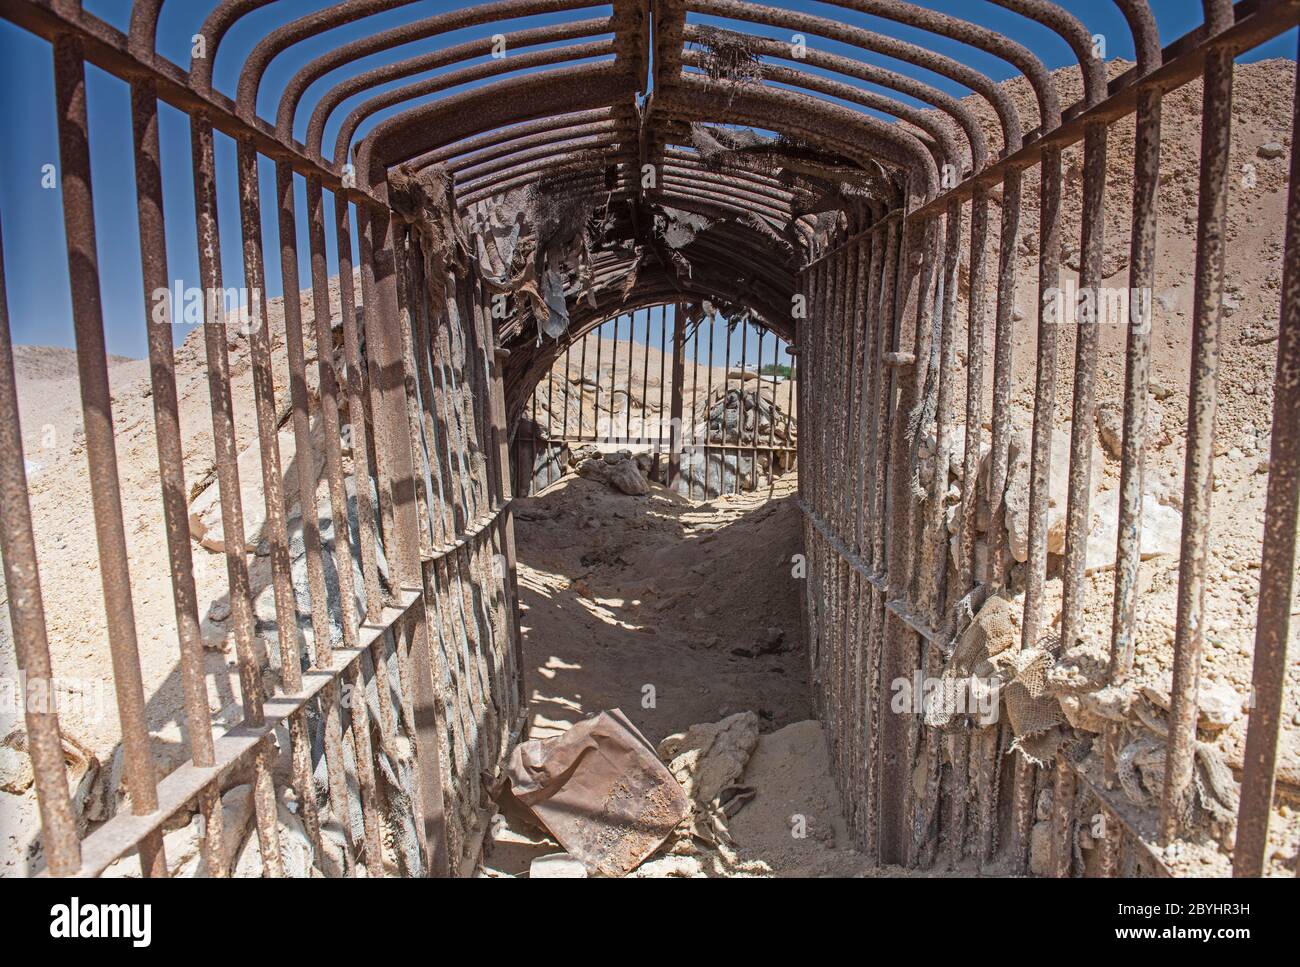 Remains of an old abandoned military army underground bunker dugout in the desert of africa Stock Photo